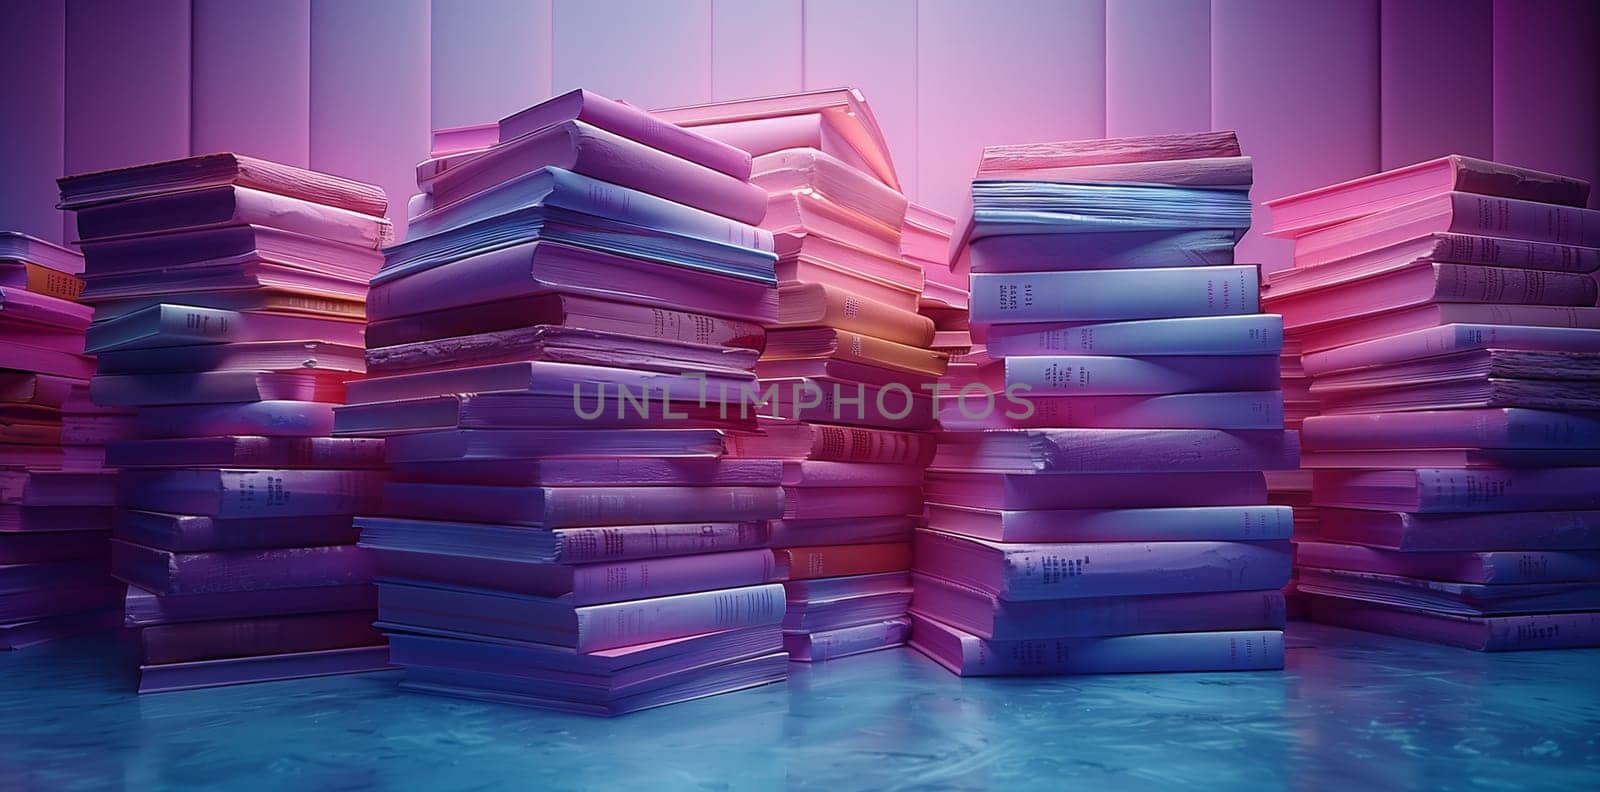 A stack of books in a room with purple liquid dripping down by richwolf